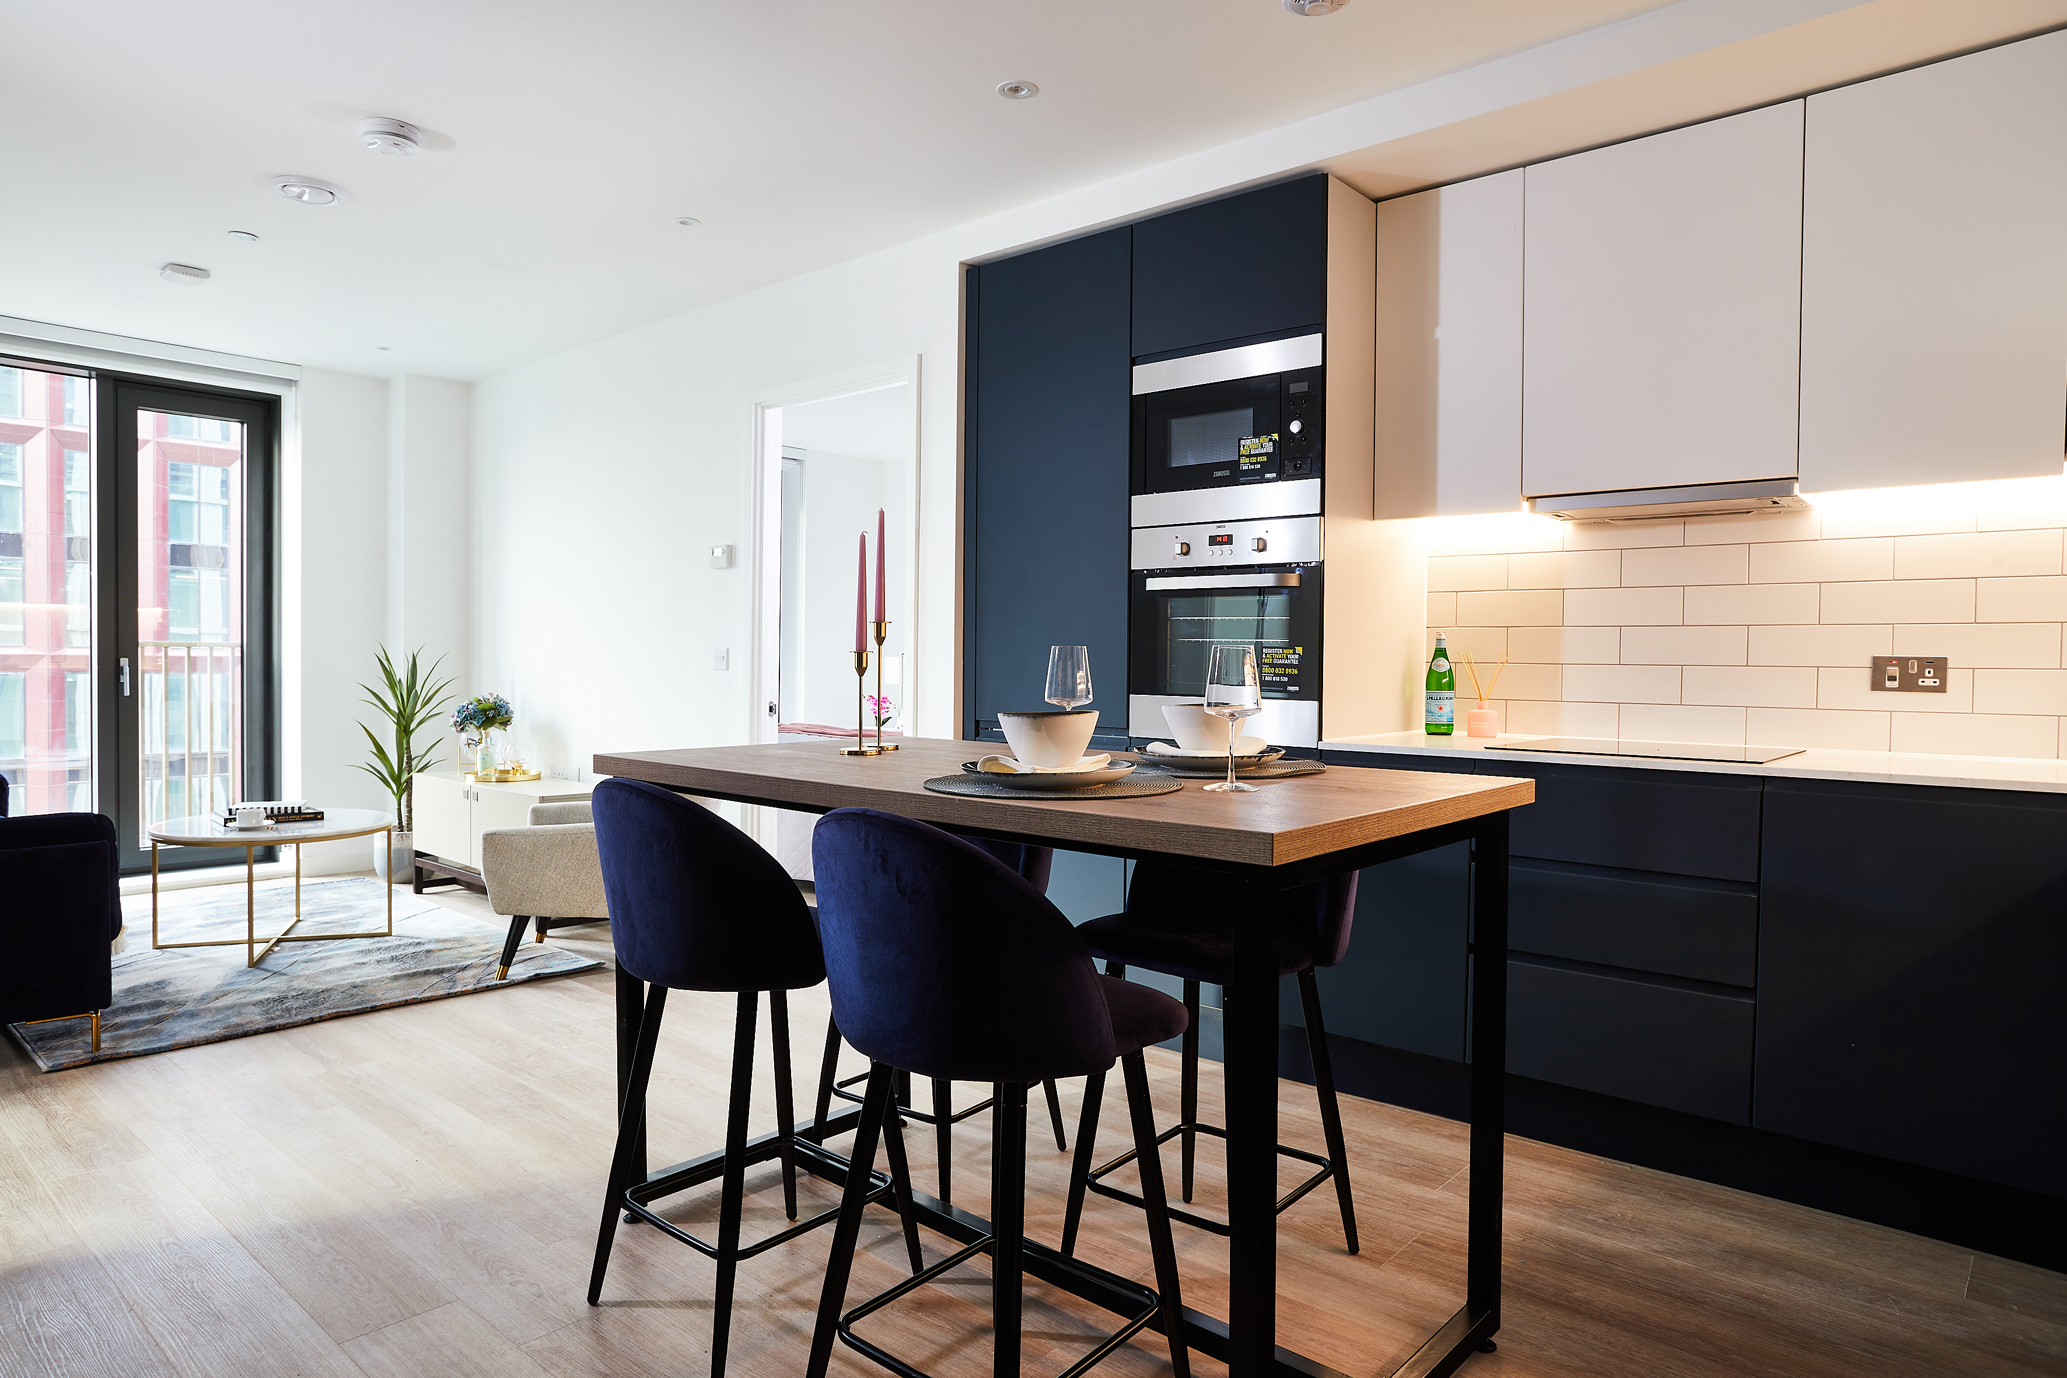 DEANESTOR COMPLETES FIRST PHASE OF £4M FITOUT CONTRACT FOR ONE OF THE BIGGEST BUILD-TO-RENT SCHEMES IN MANCHESTER @Deanestor1